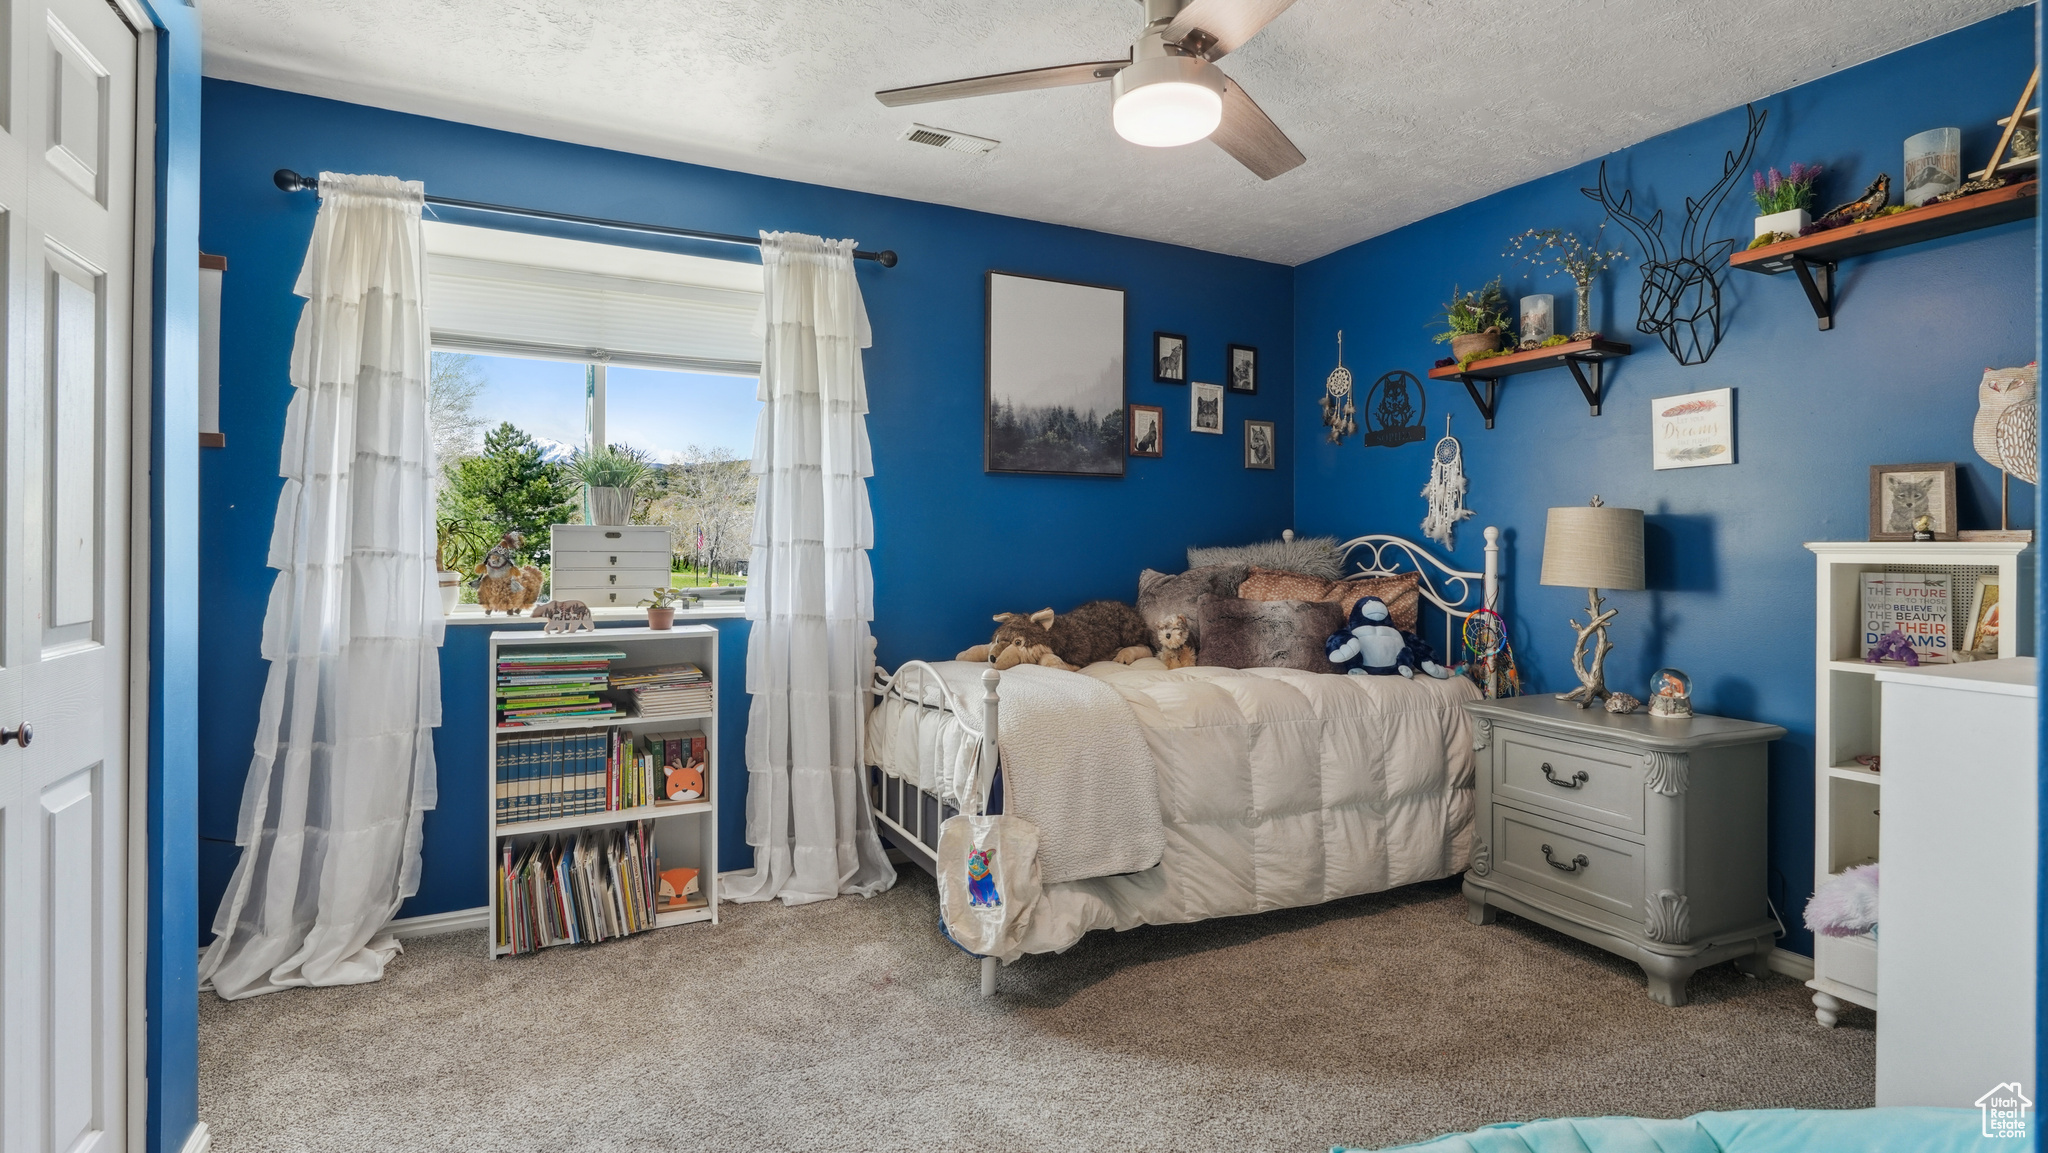 Bedroom with ceiling fan, carpet, and a textured ceiling